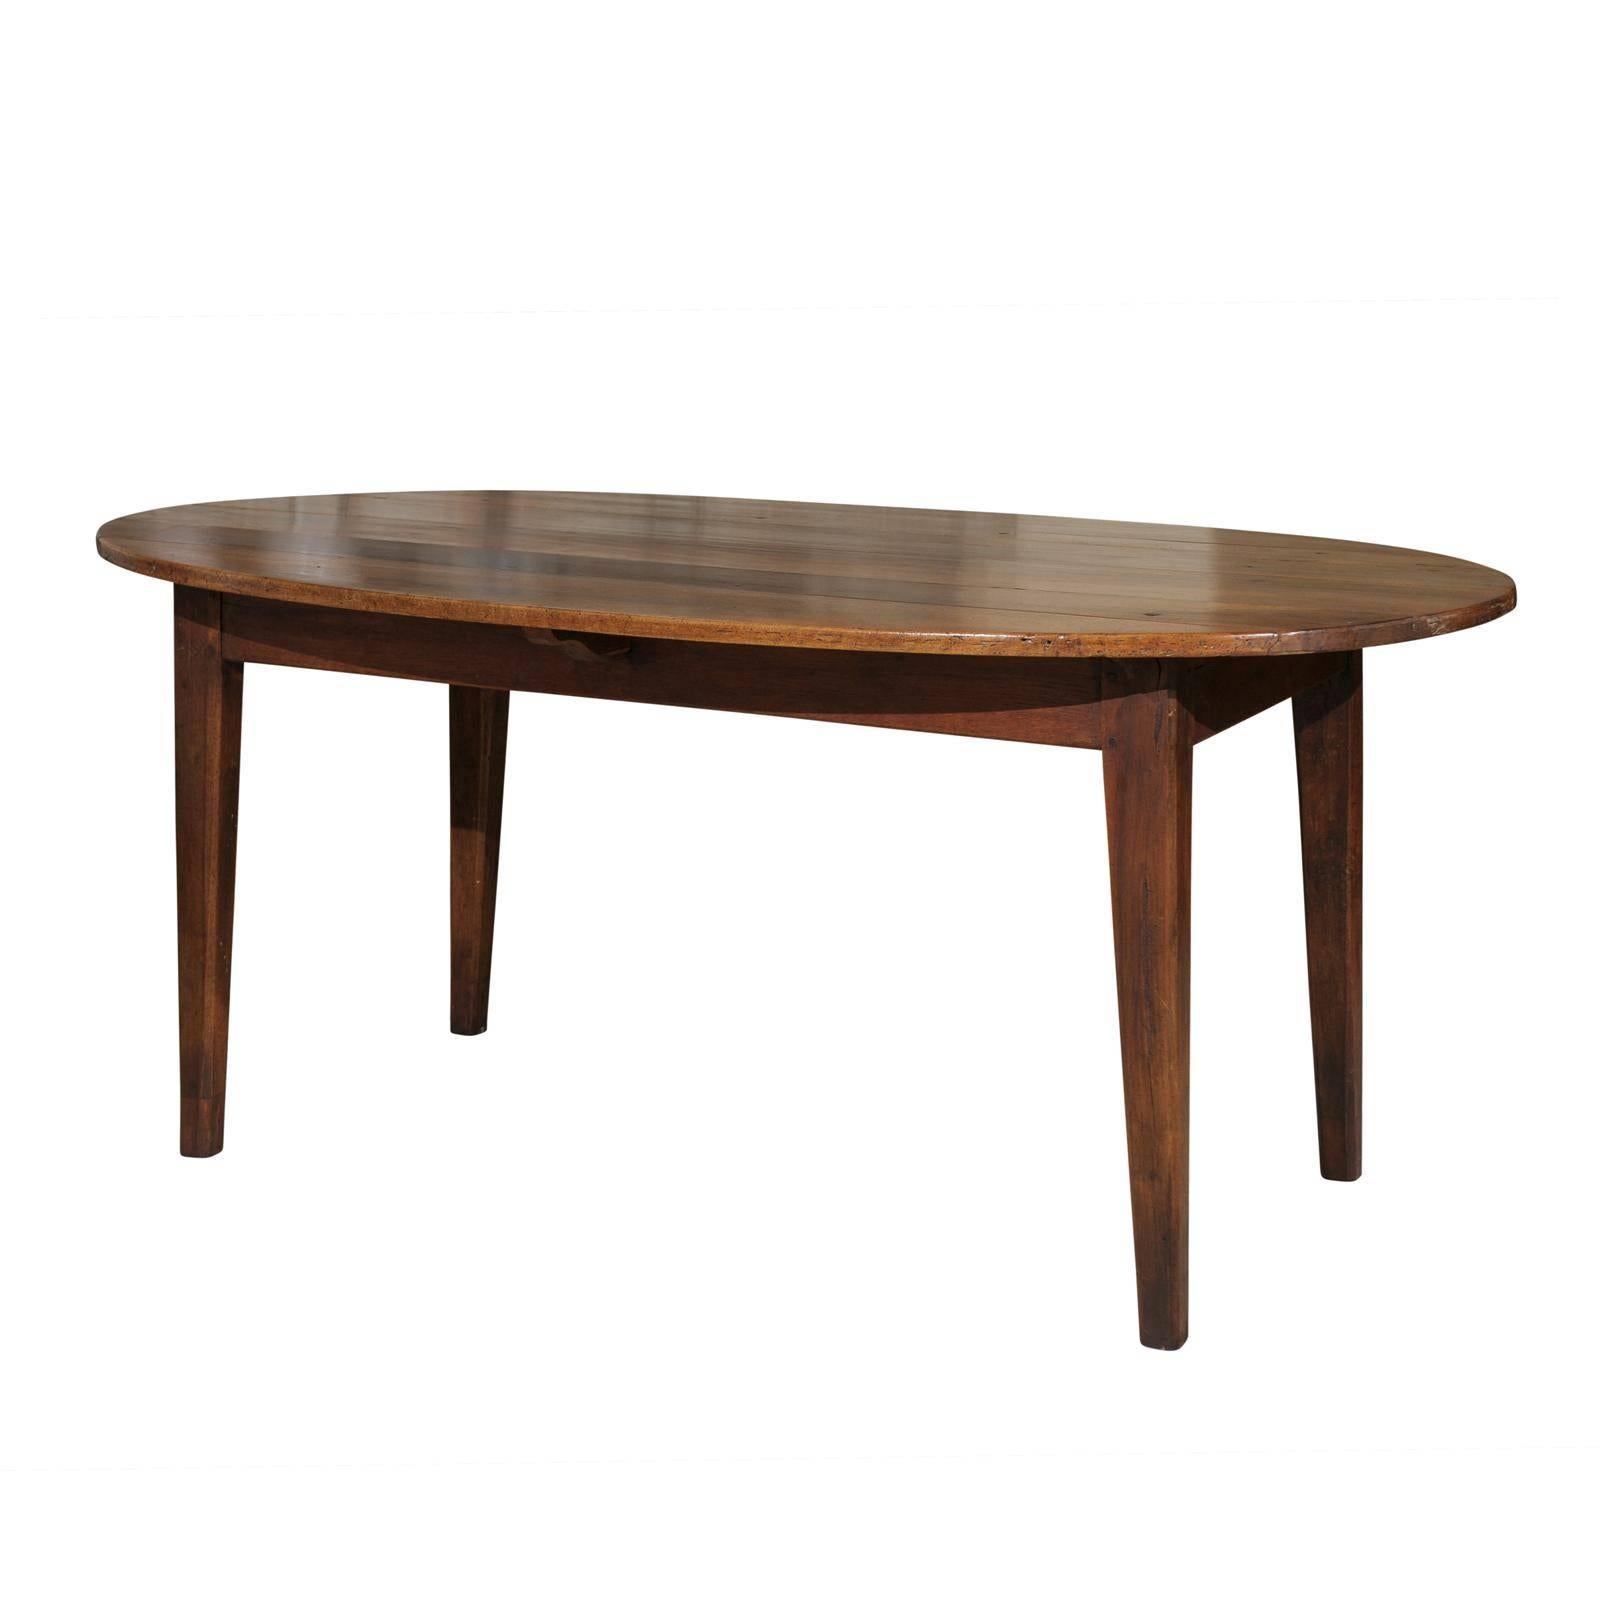 19th Century Walnut Dining Table from France, circa 1880